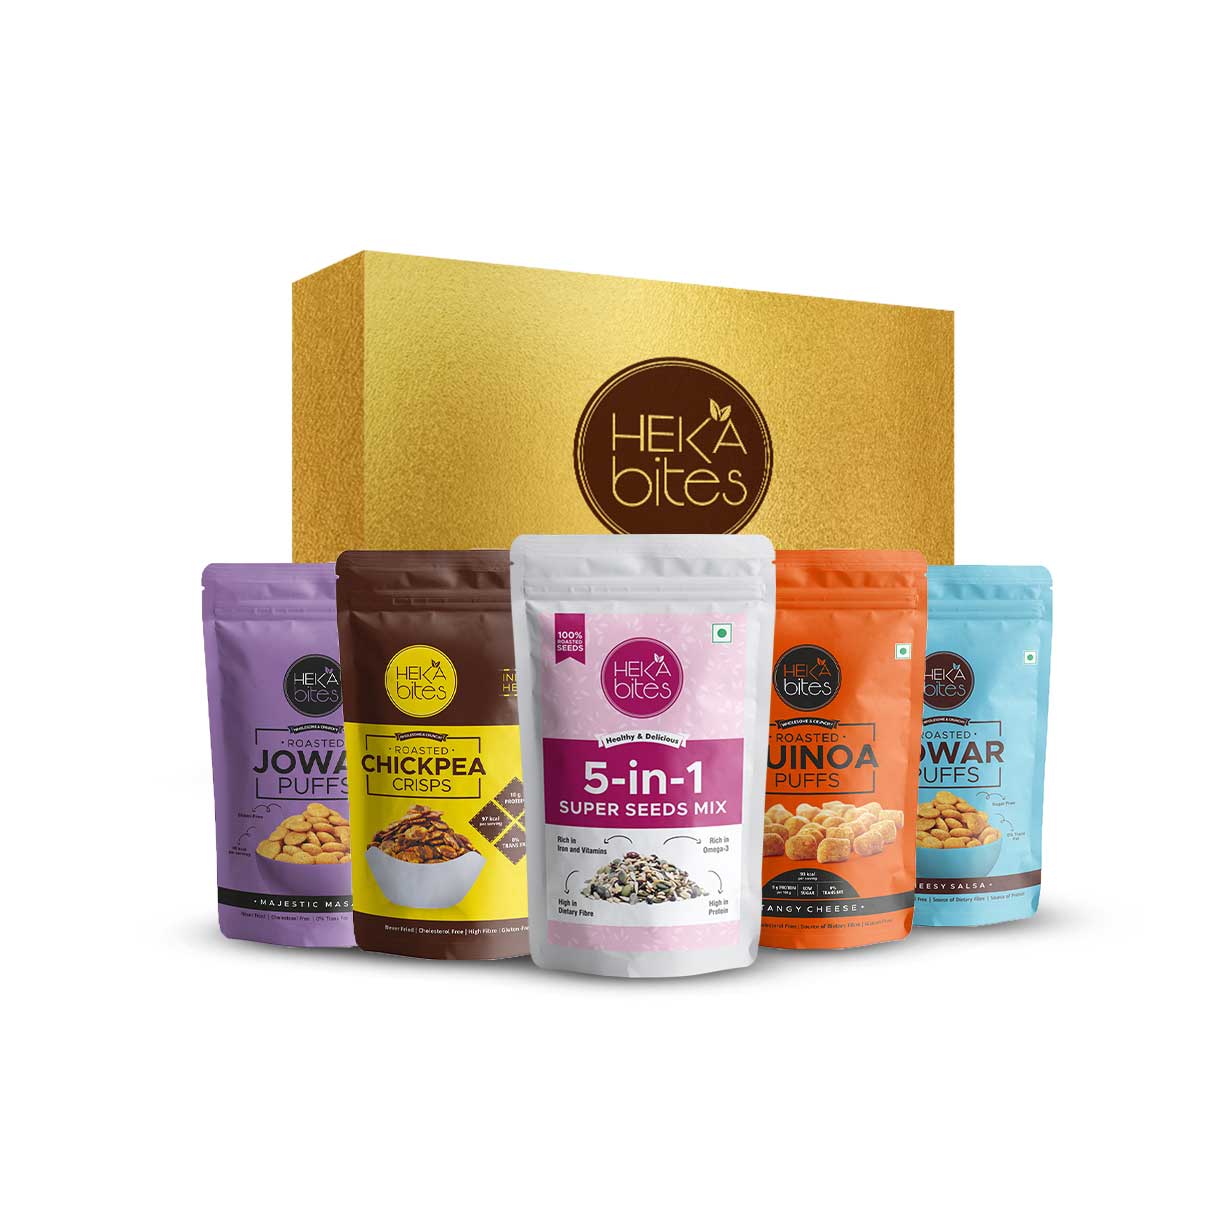 Heka Bites Gourmet Hamper with Healthy and Delicious Snacks